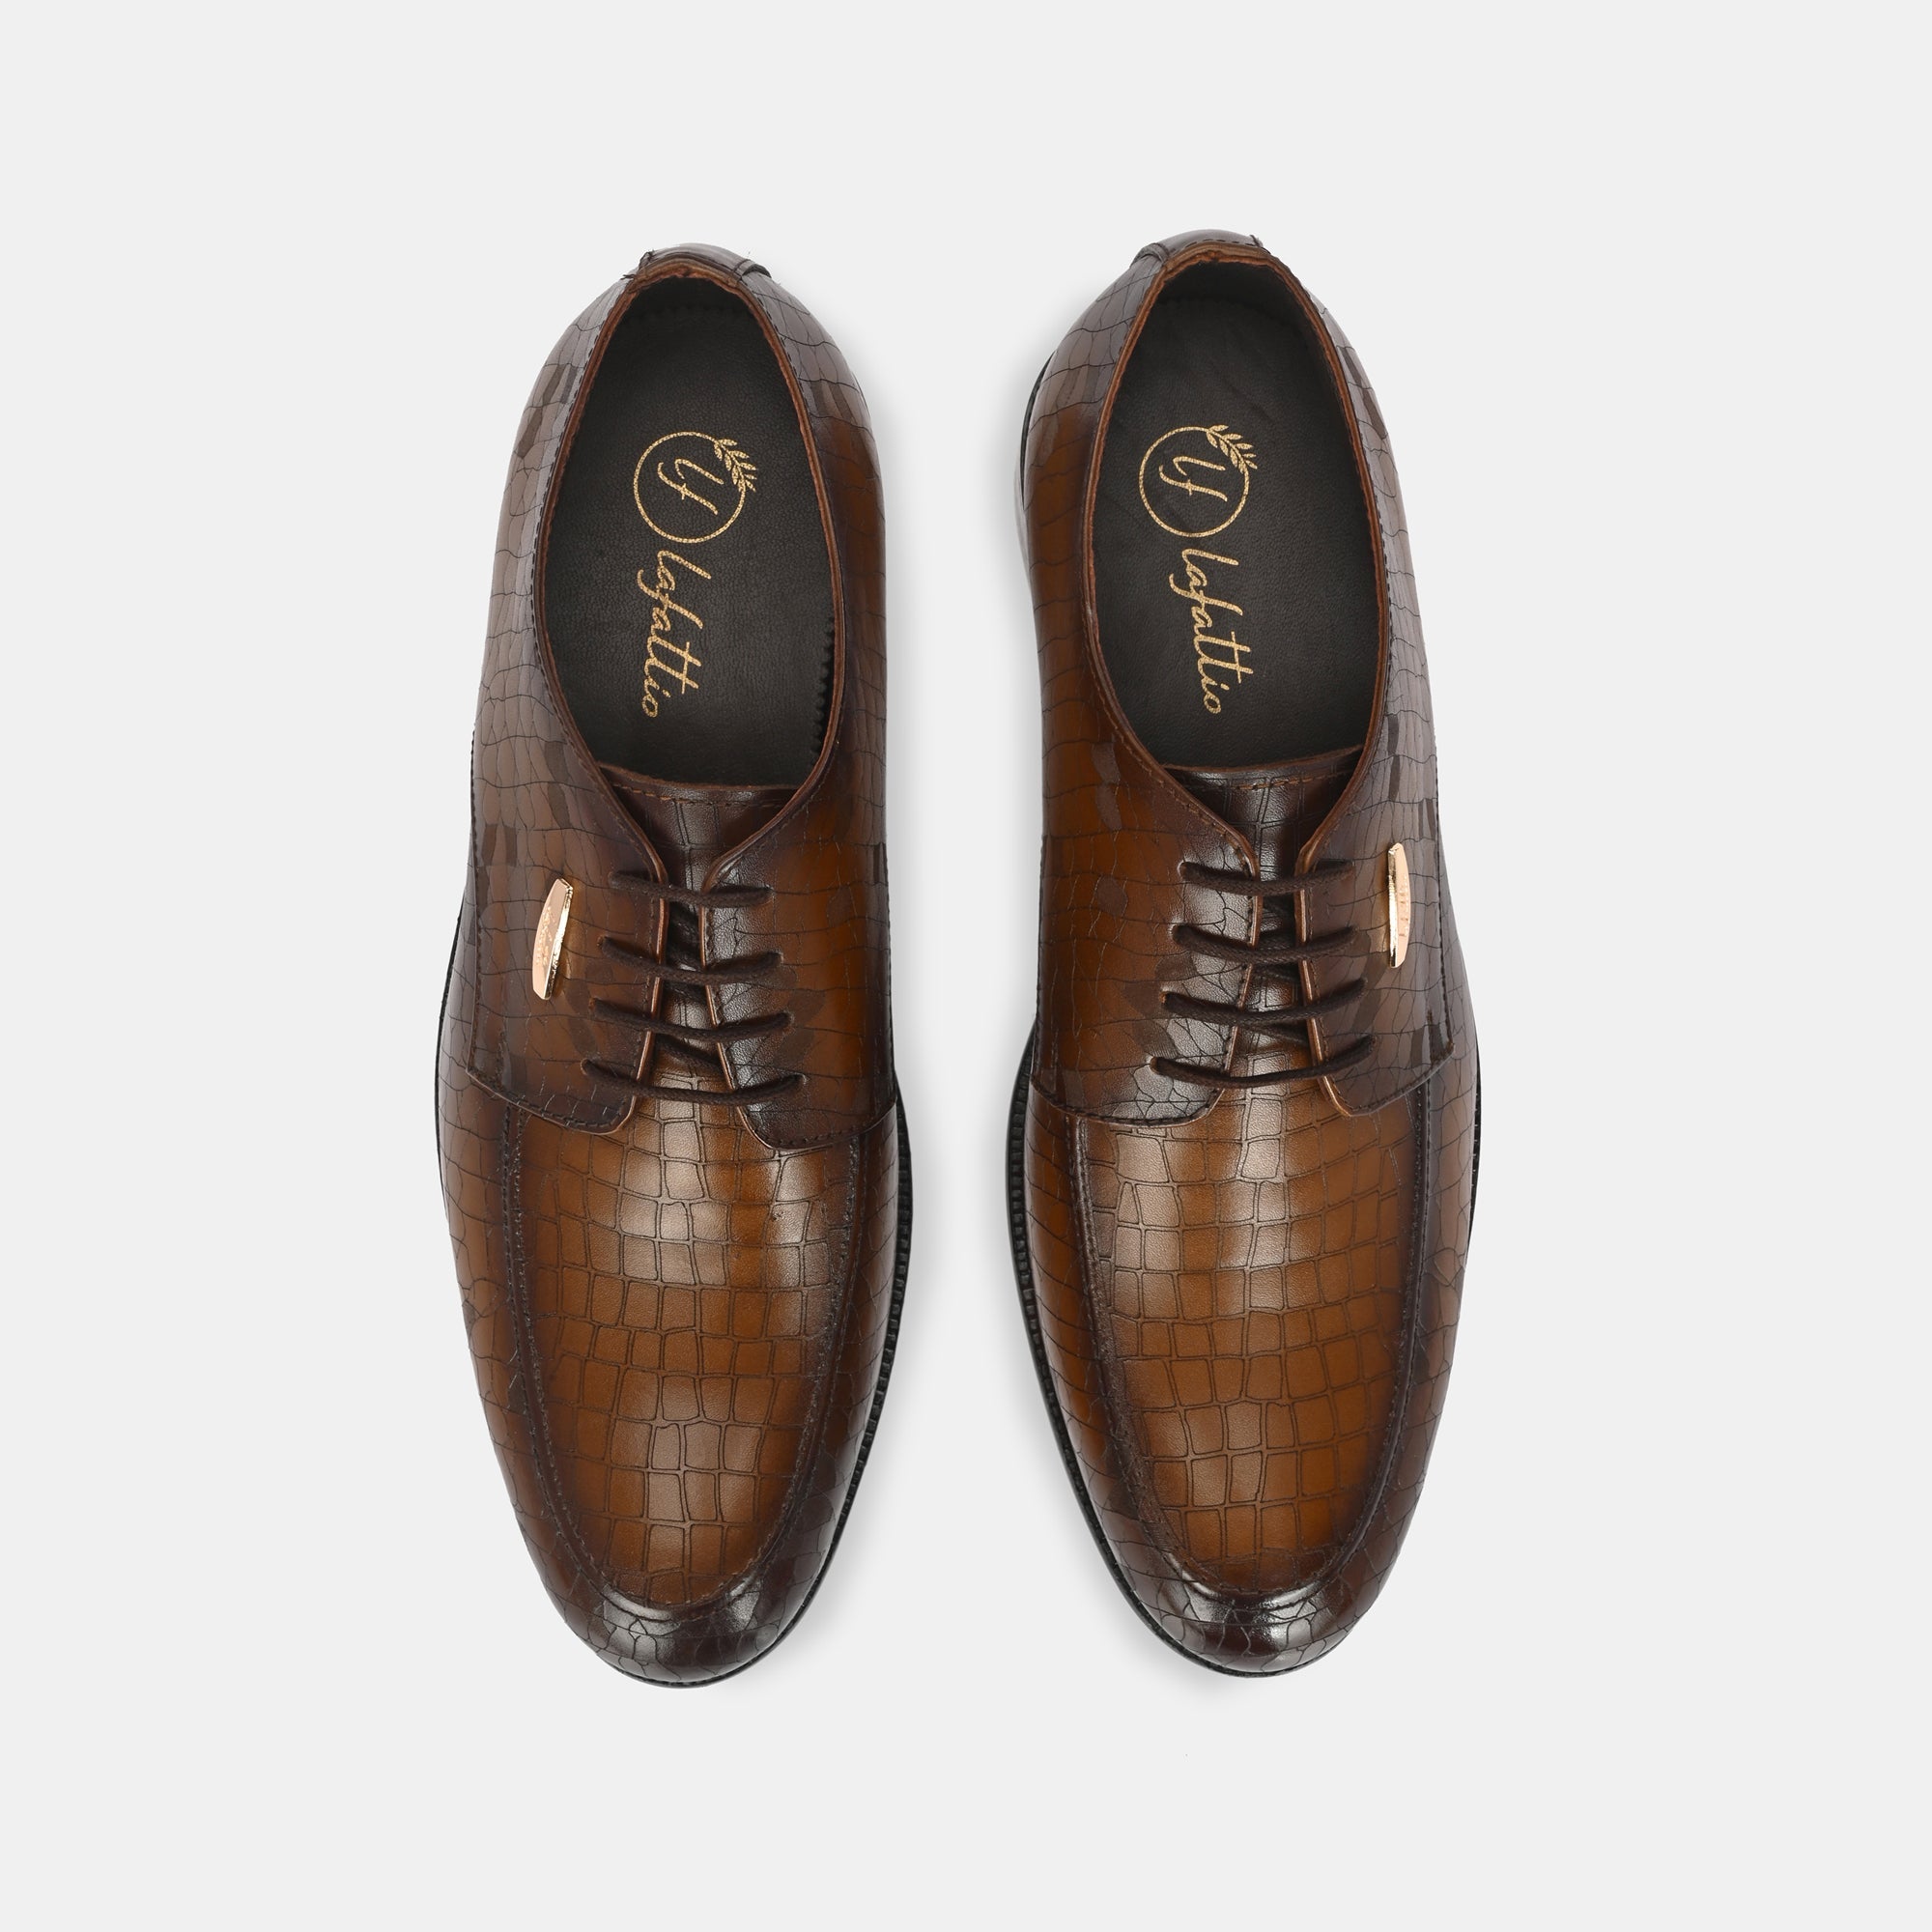 Tan Laser Engraved Lace-Up Shoes by Lafattio